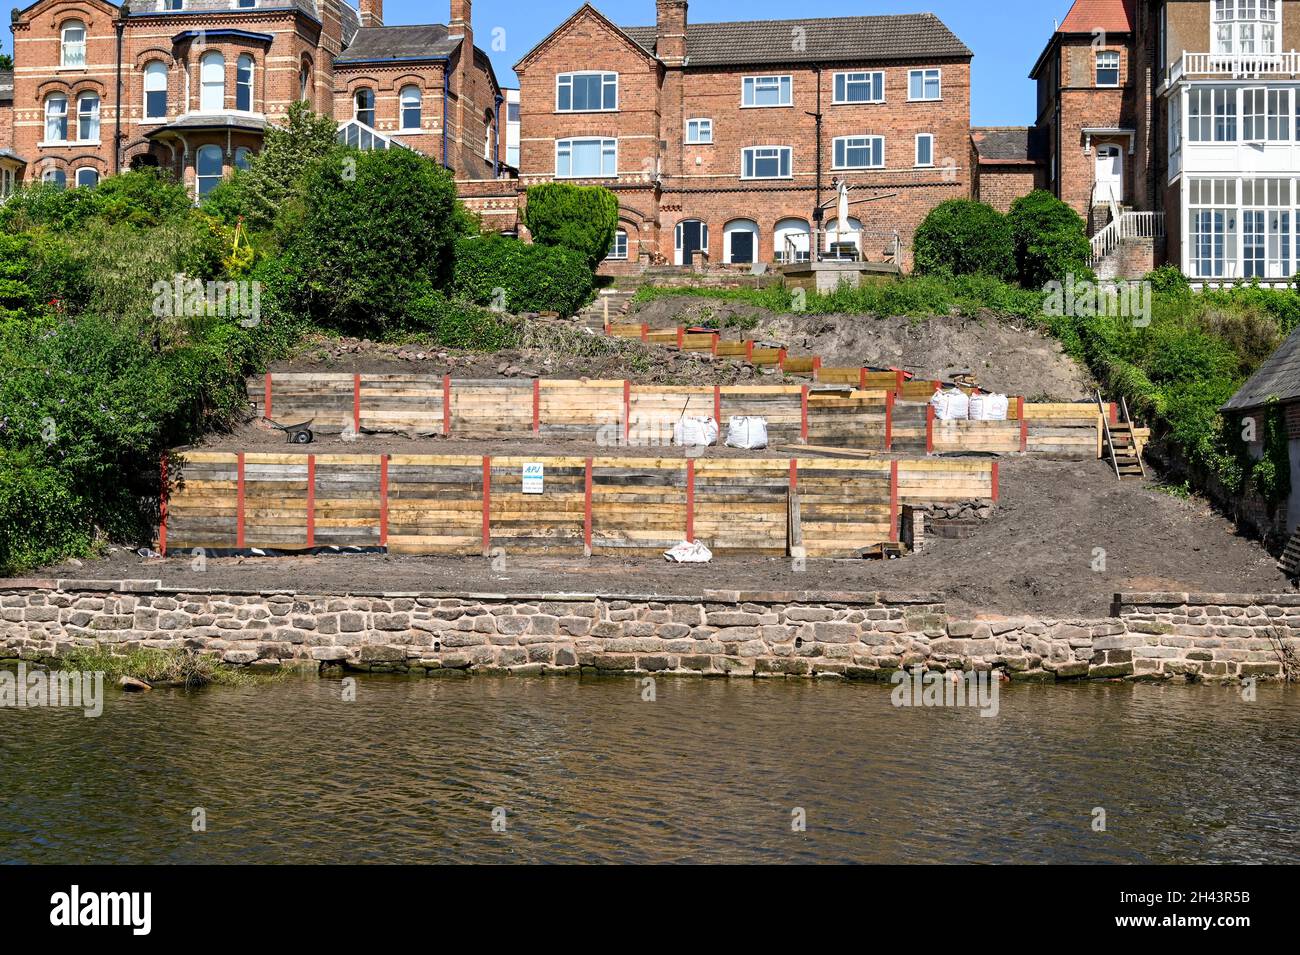 Chester, England - July 2021: Landscape gardening work being undertaken on a steep garden sloping down to the banks of the River Dee in Chester Stock Photo